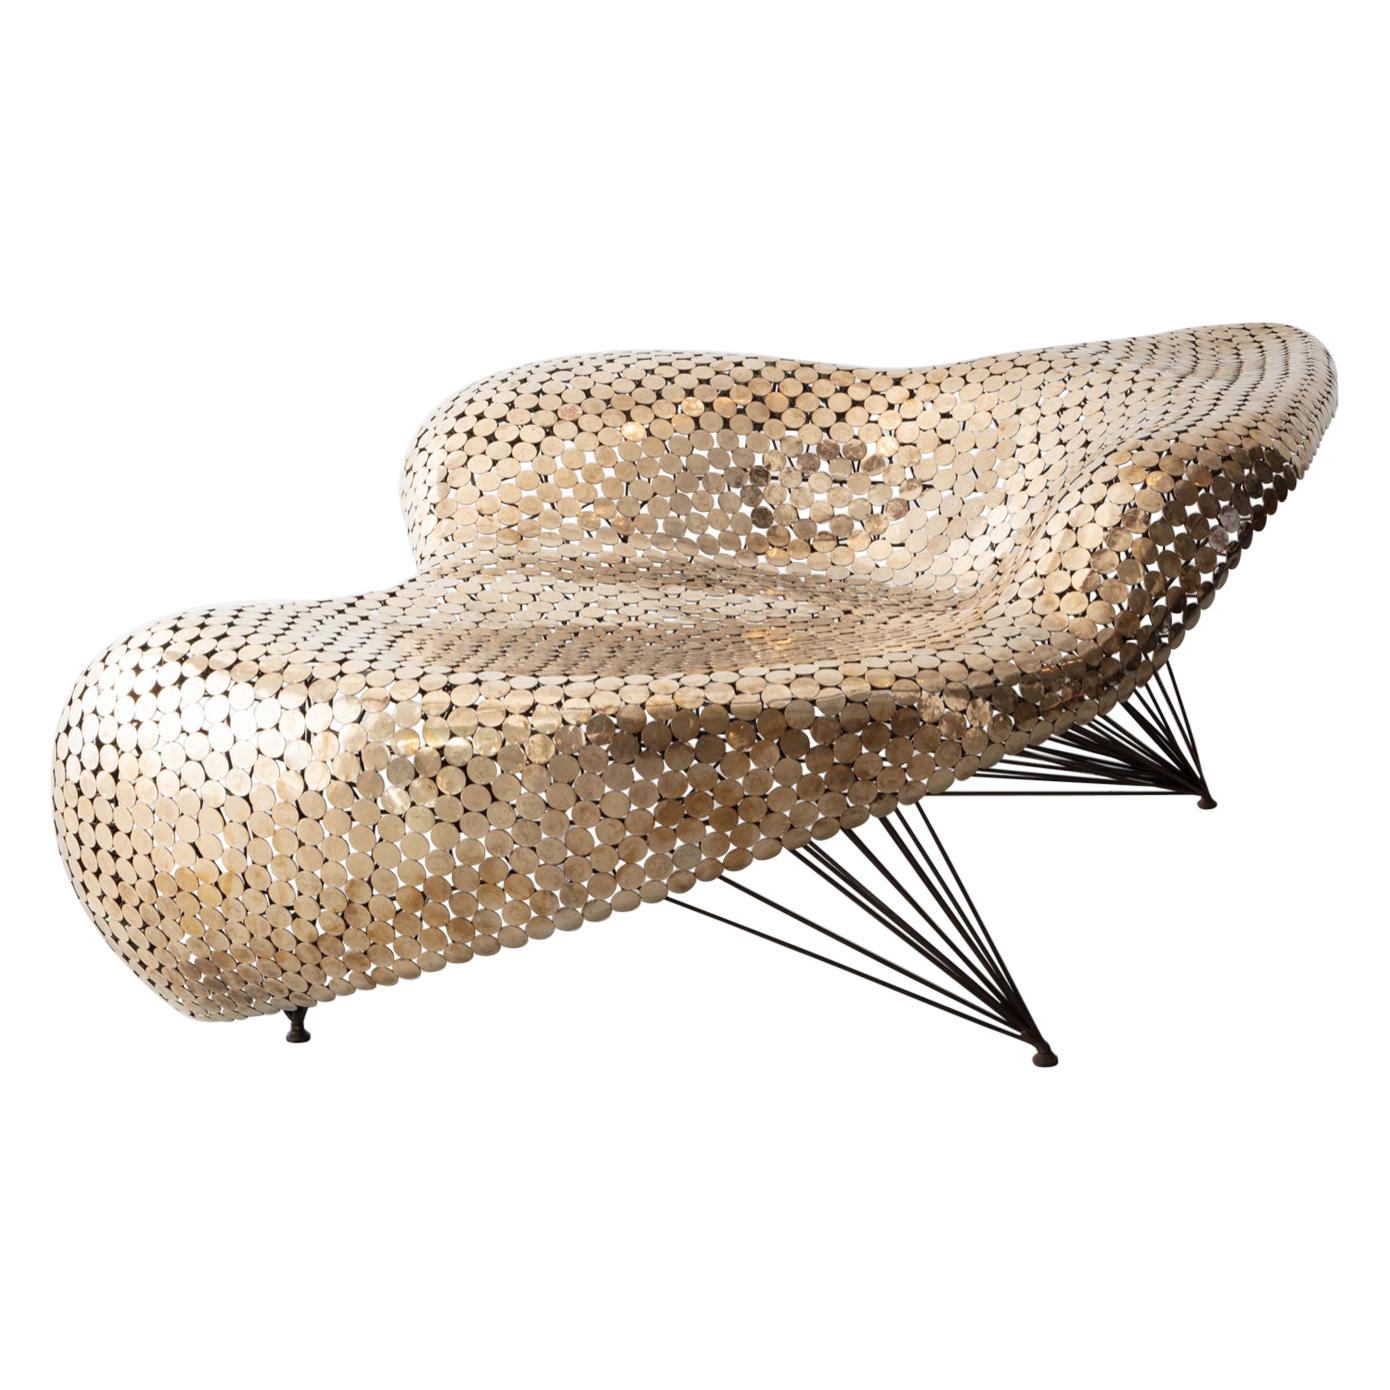 "Manta 'Ray', " A Unique Seat in the "Septem Maria" by Johnny Swing